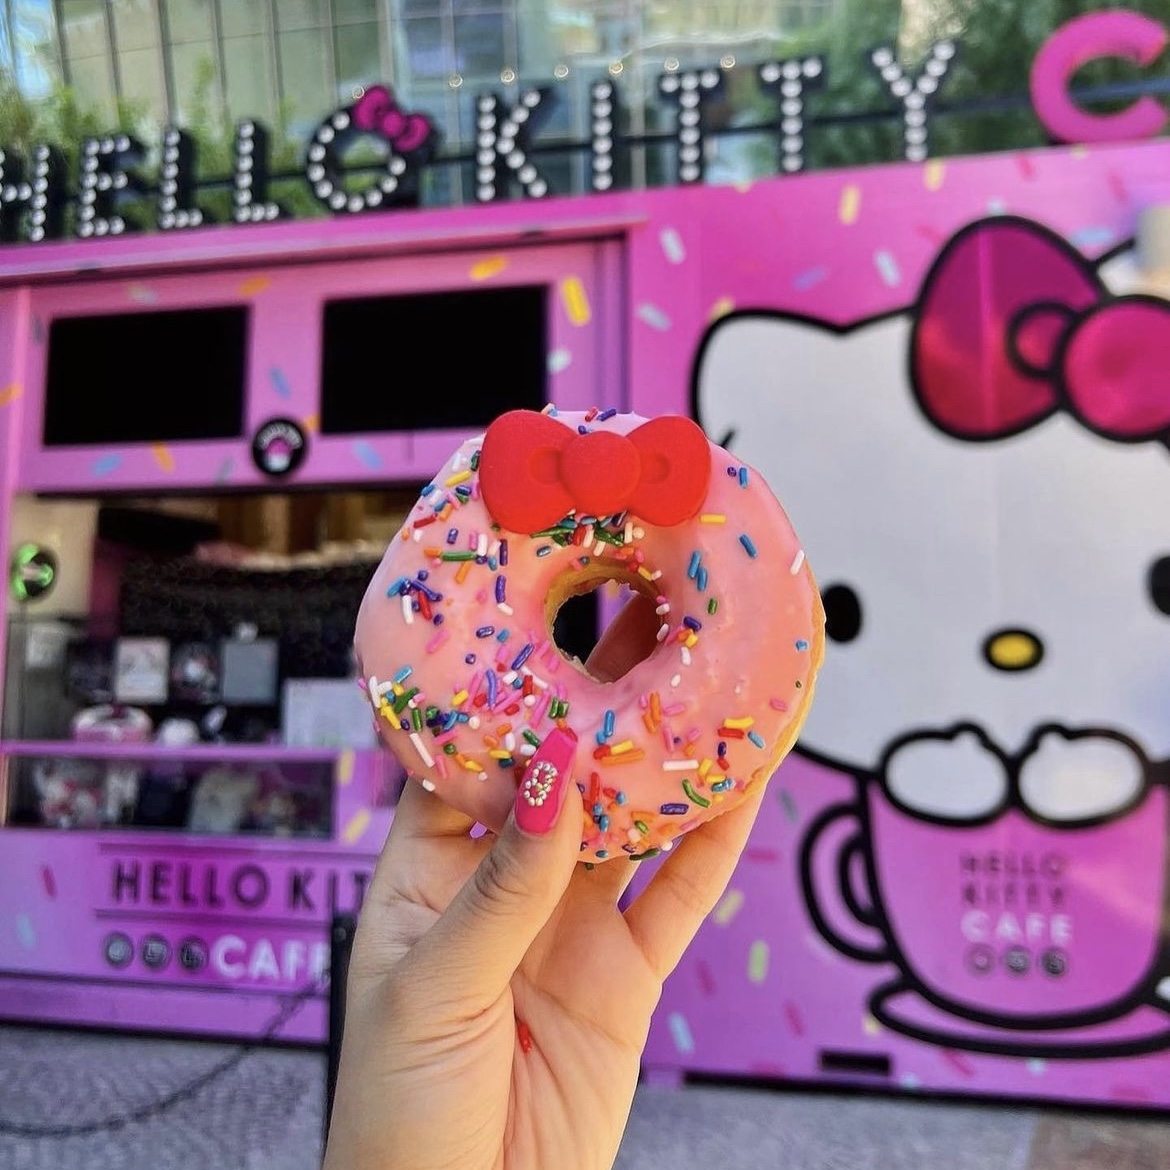 Hello Kitty Cafe on X: The perfect way to sweeten your day